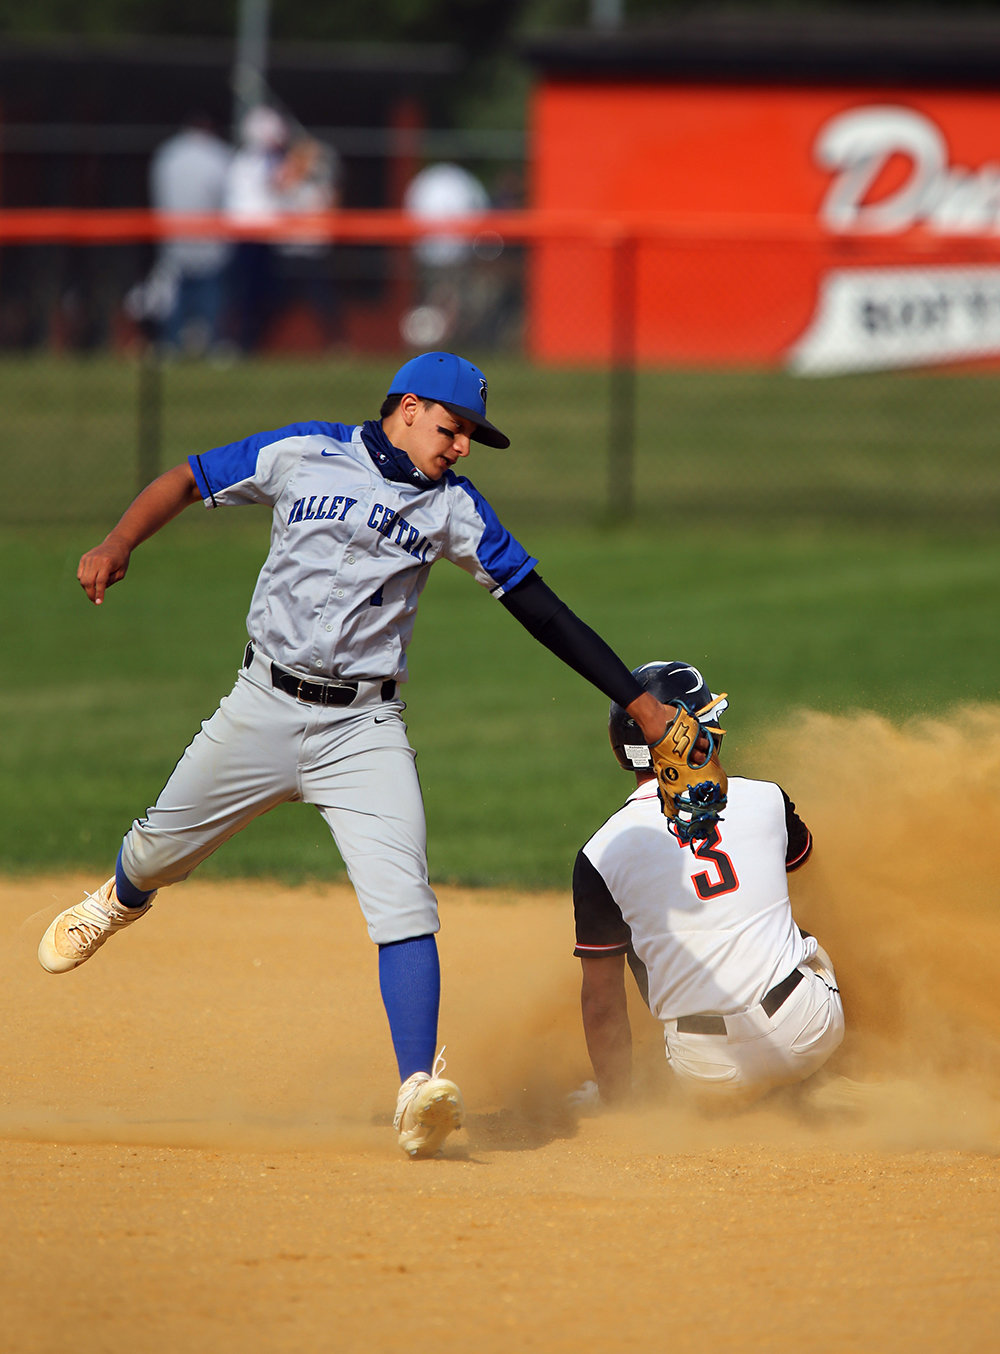 Valley Central shortstop Andrew Bonilla attempts to tag Marlboro’s Alex Grzechowski as he steals second base.